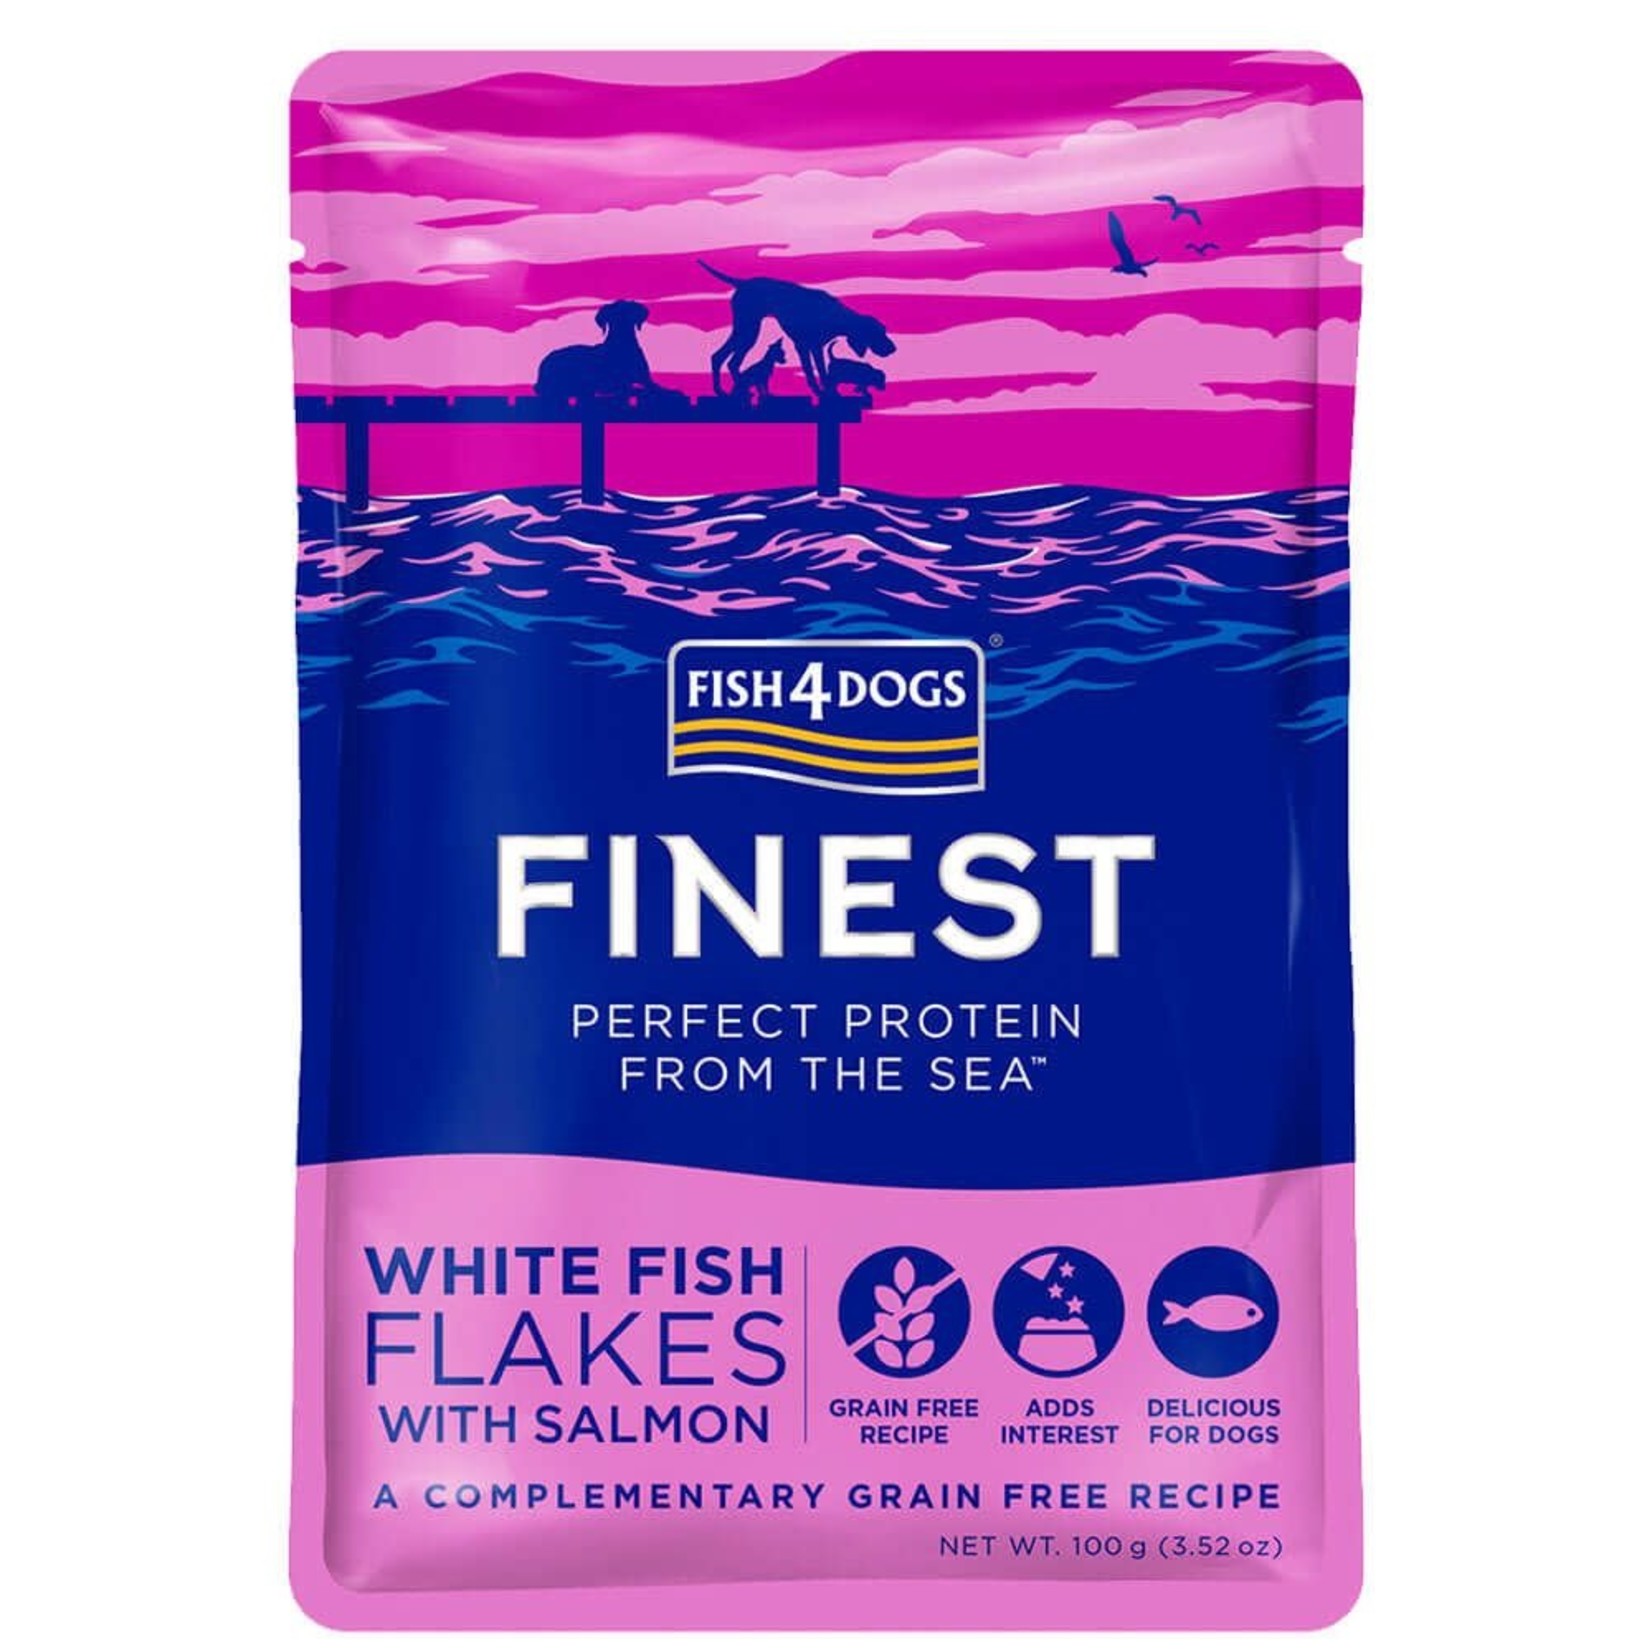 Fish4Dogs Finest Wet Dog Food White Fish Flakes with Salmon, 100g pouch